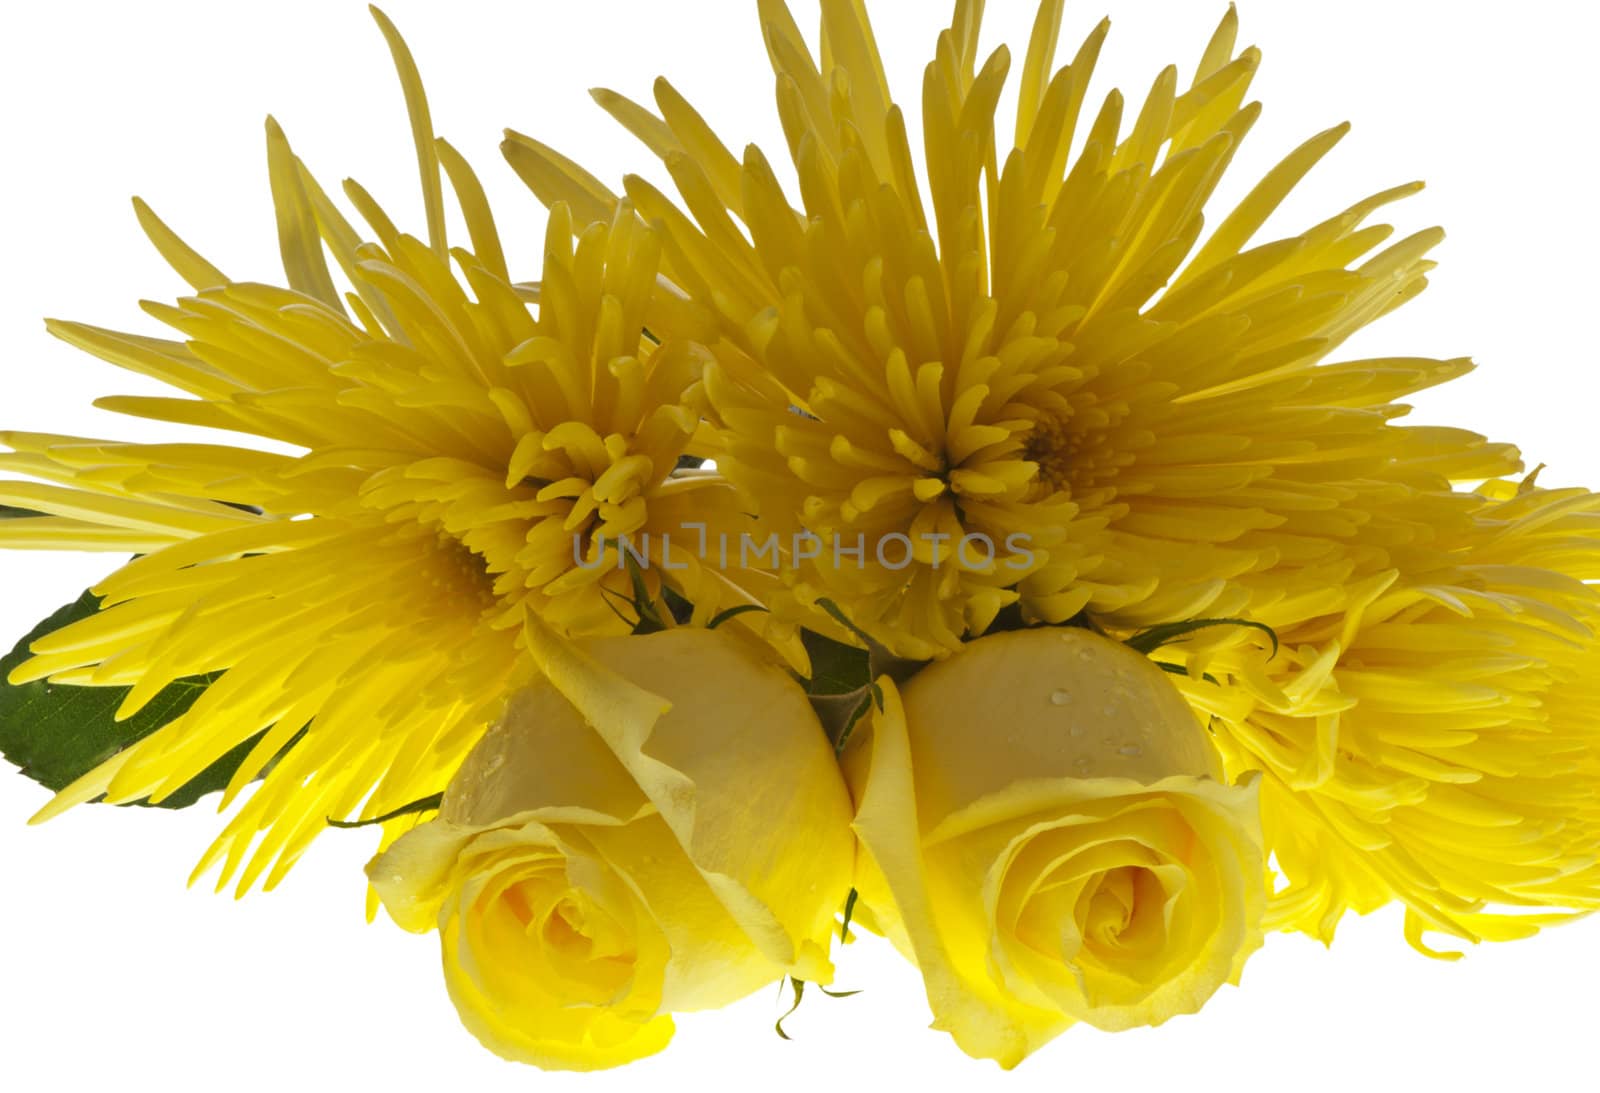 Composition of flowers on a white background
